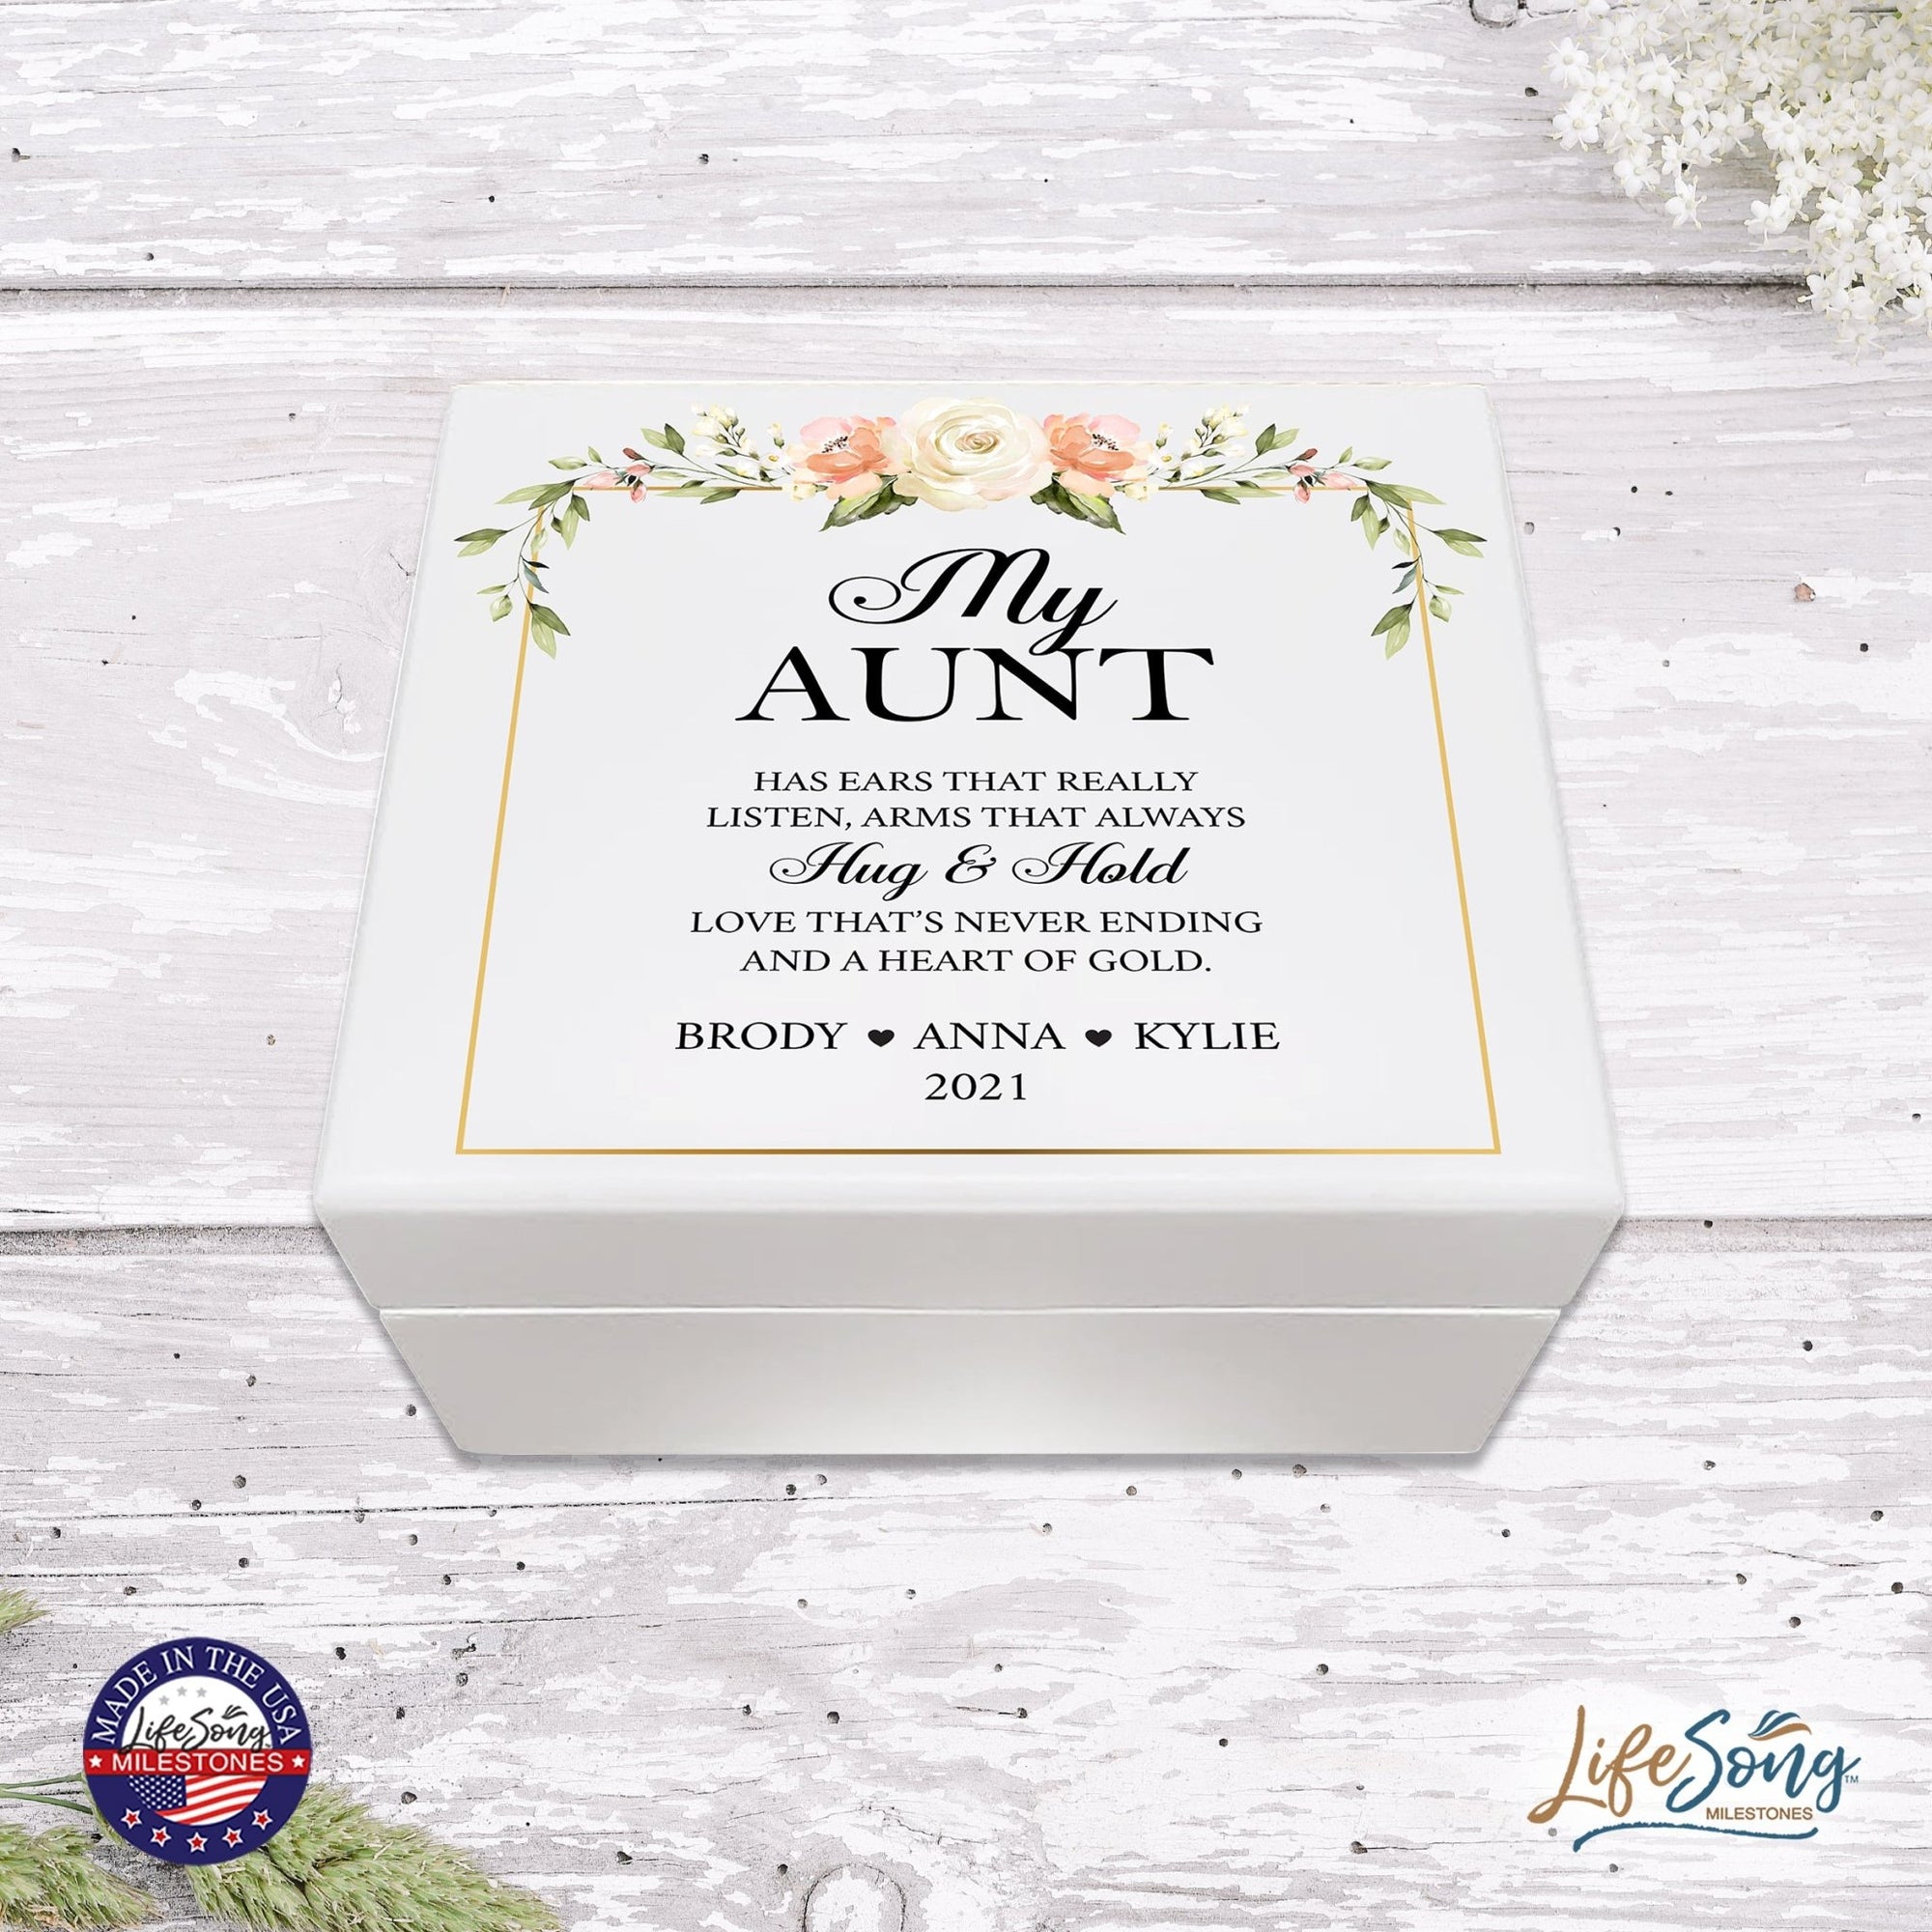 Personalized Memorable Aunt’s White Keepsake Box 6x5.5in with inspiring verse - Hug and Hold - LifeSong Milestones